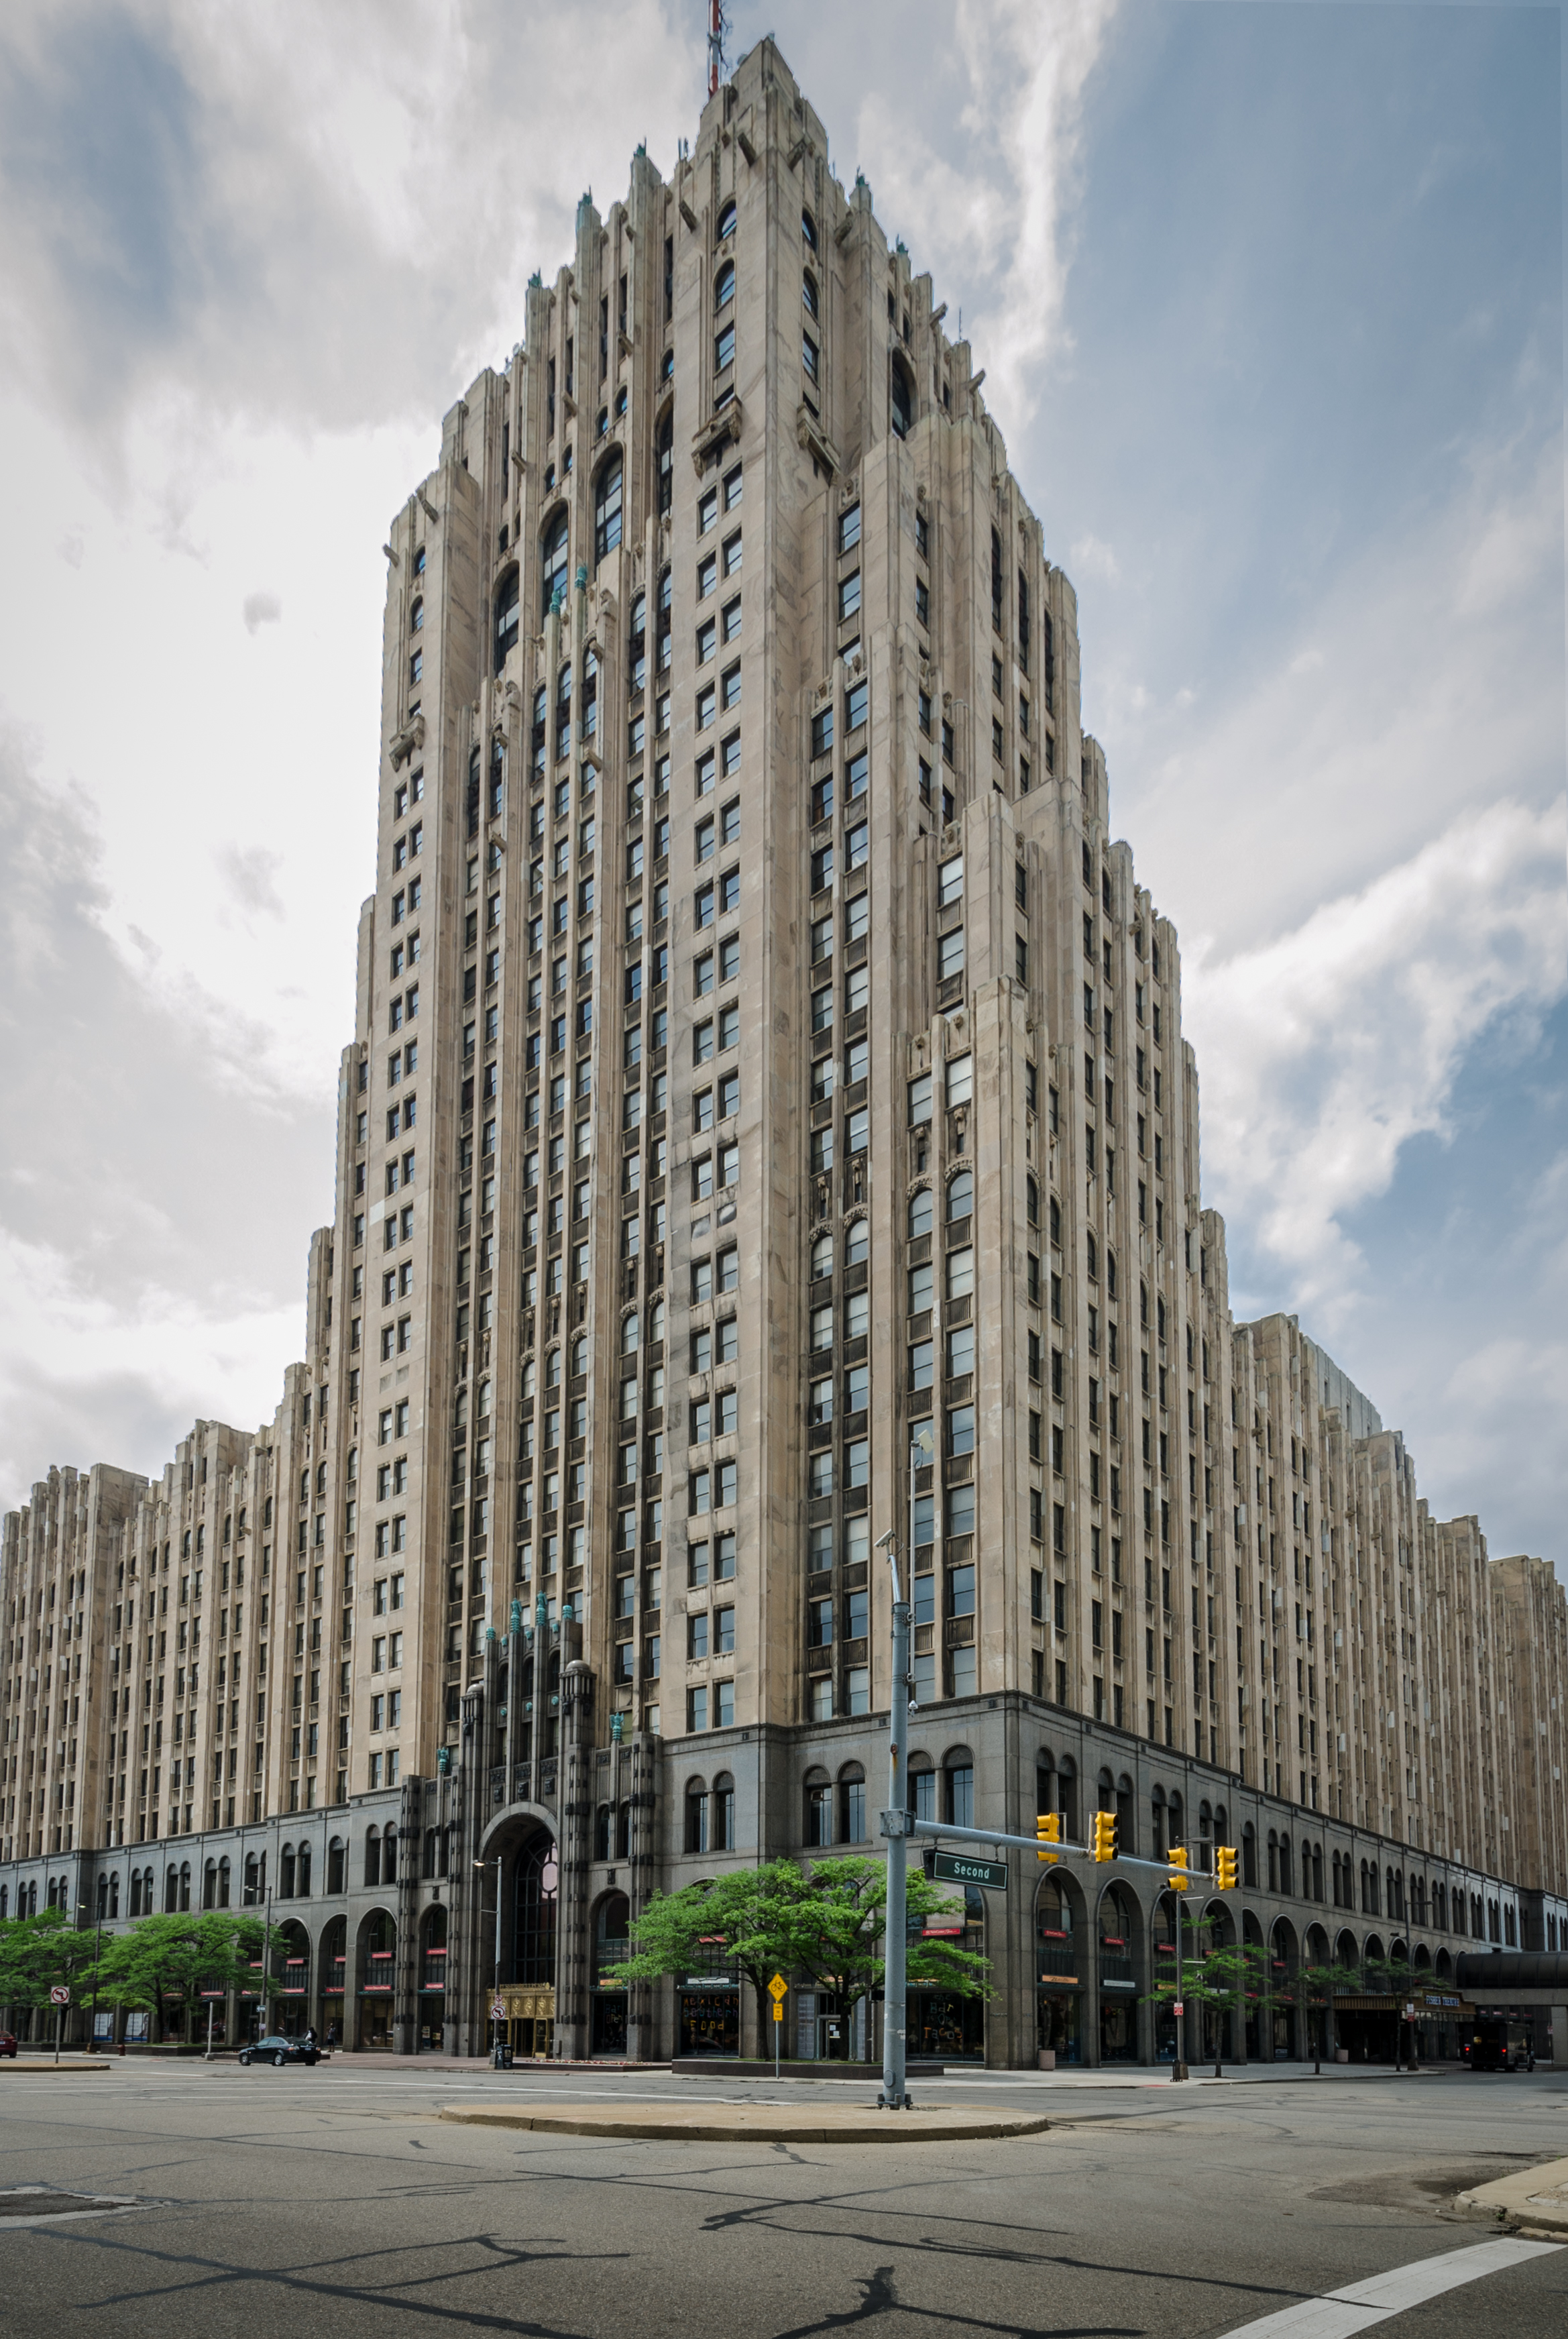 The Fisher Building